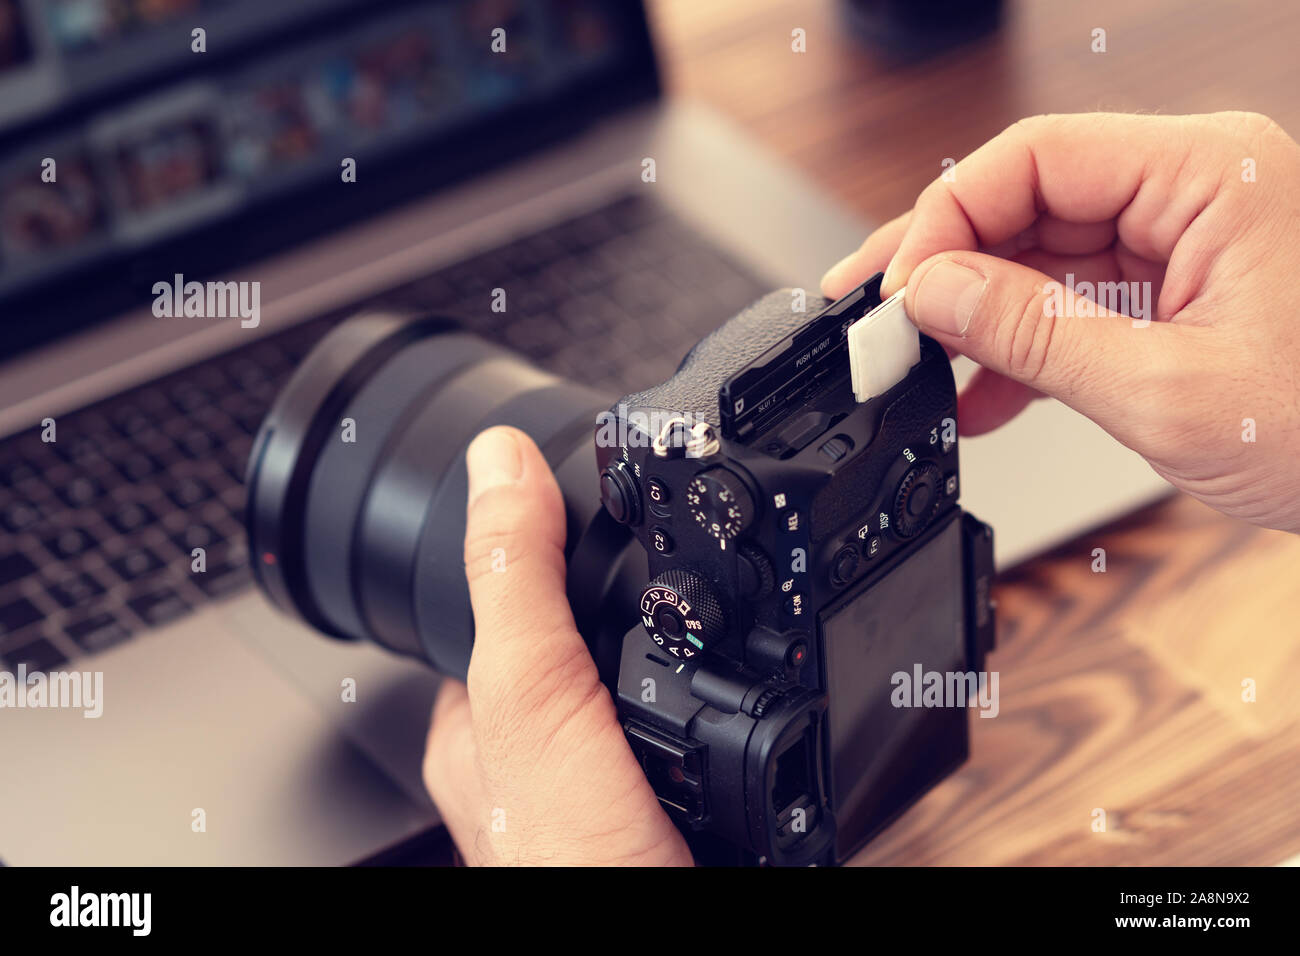 Photographer inserting or removing a memory card in professional camera. Stock Photo